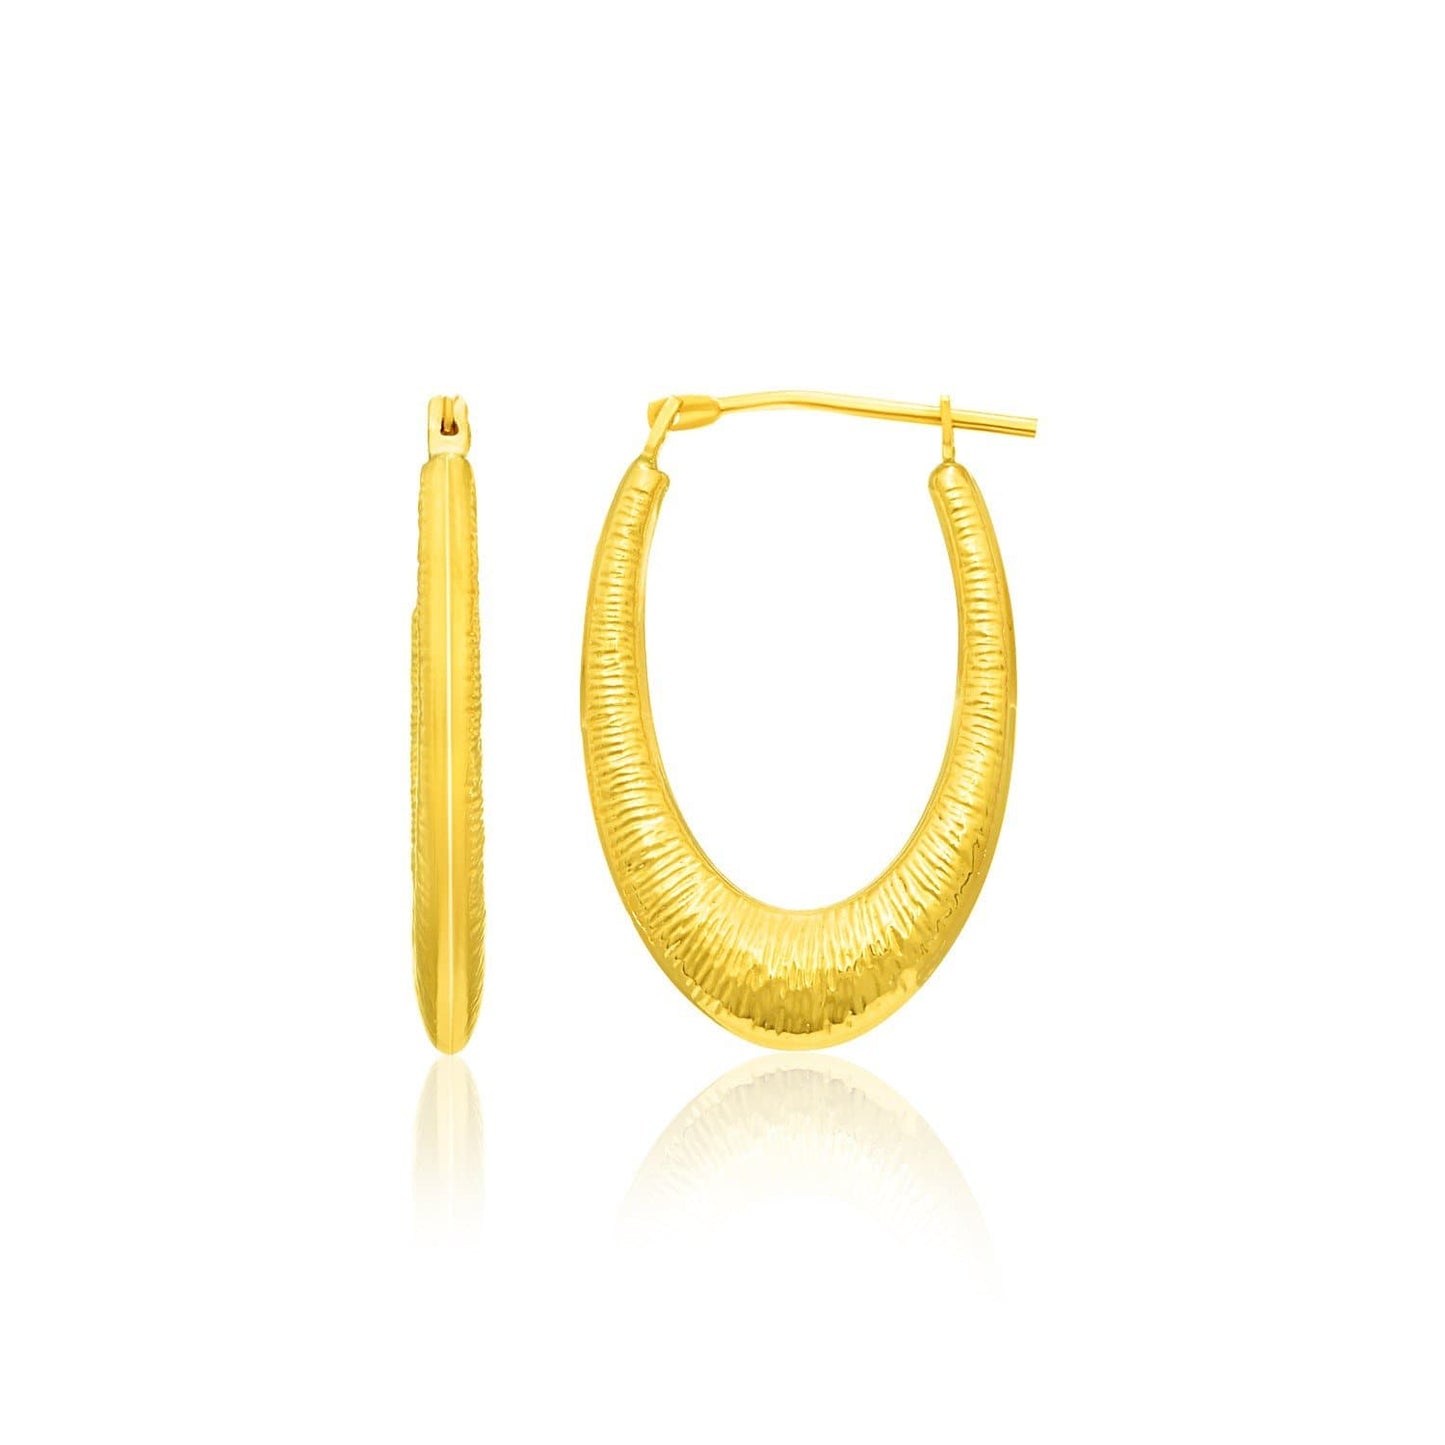 14k Yellow Gold Hoop Earrings in a Graduated Texture Style